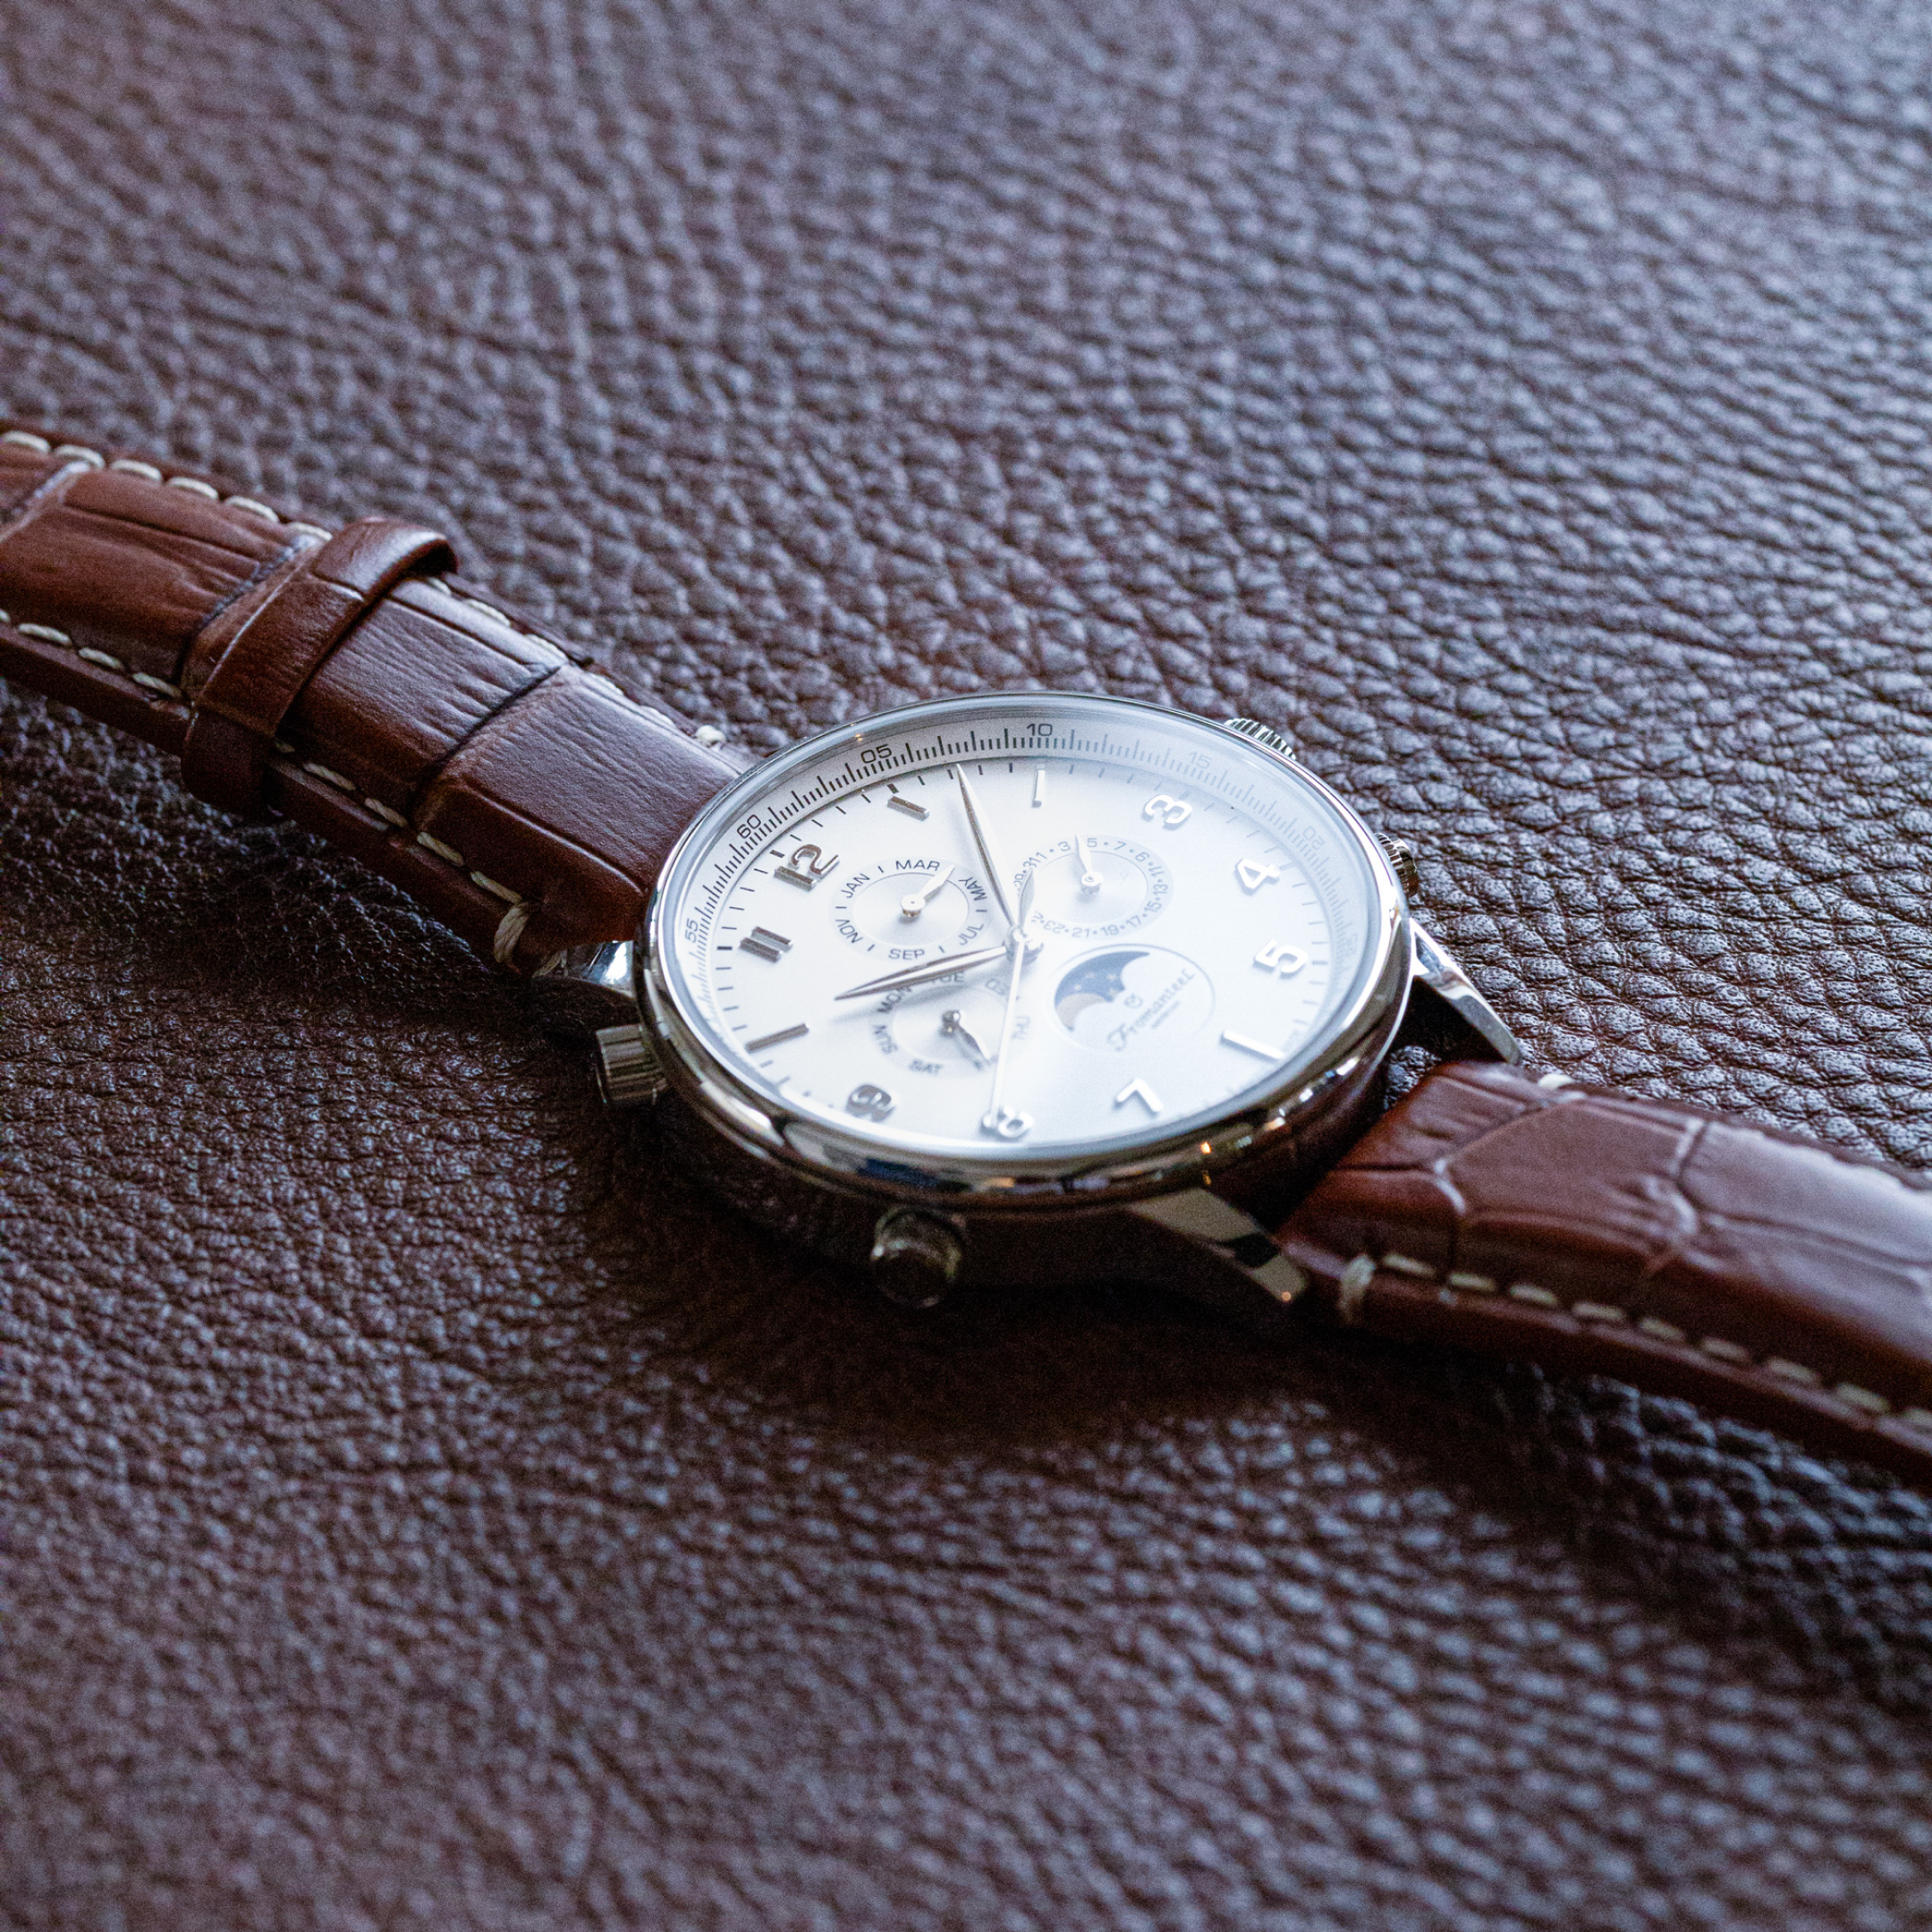 Photo of Fromanteel's iconic Moon Phase White watch with a brown leather strap laying flat on a matching brown leather surface.